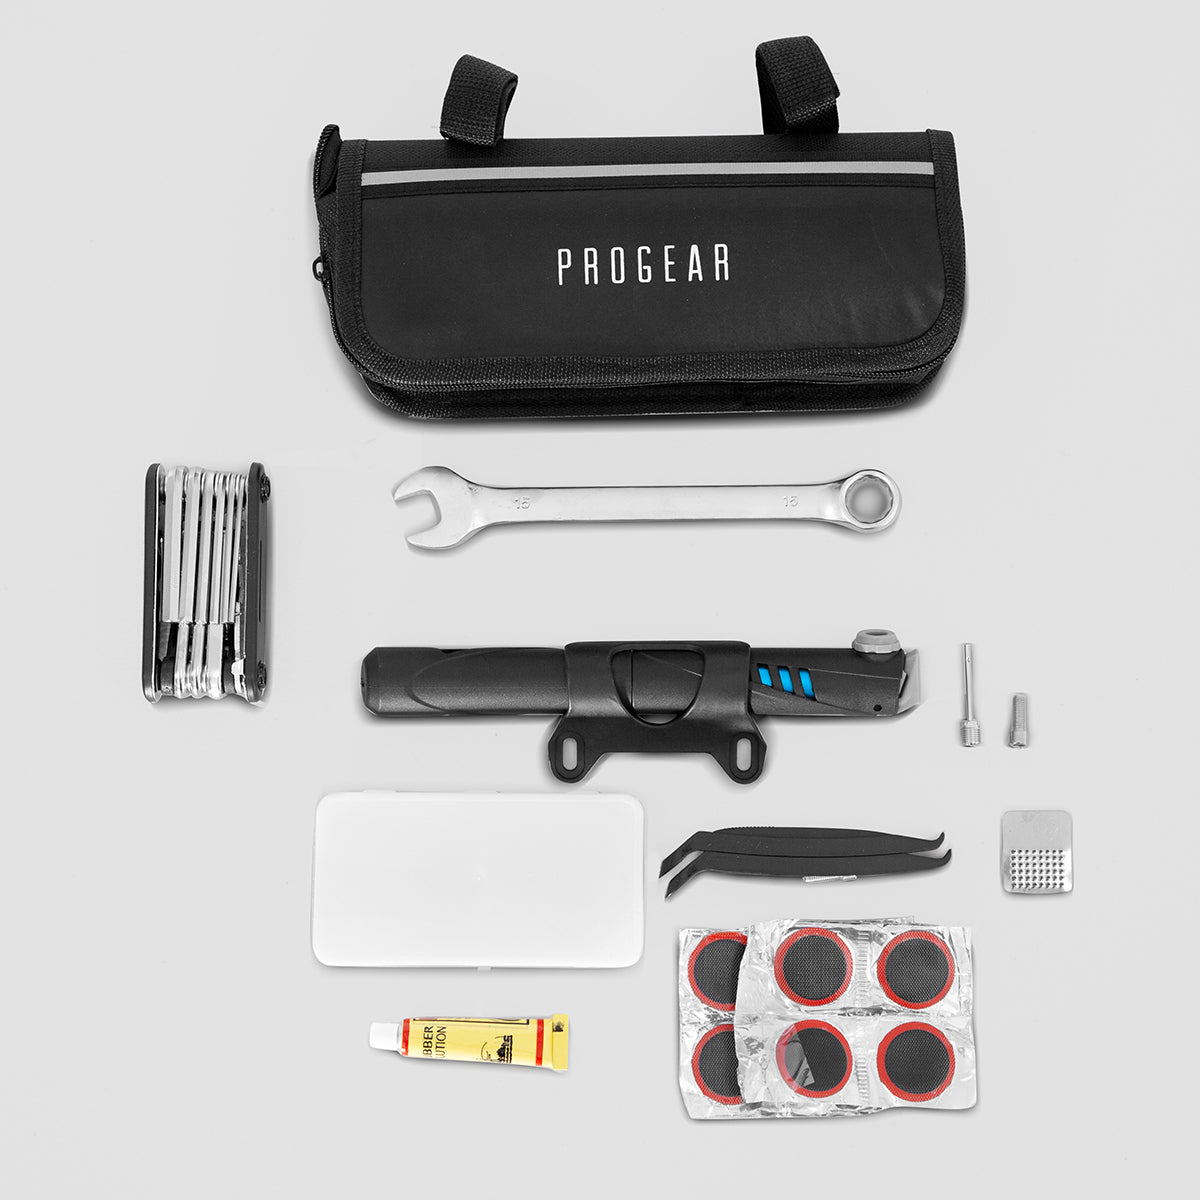 Progear 4-in-1 Tool kit with Carry Bag